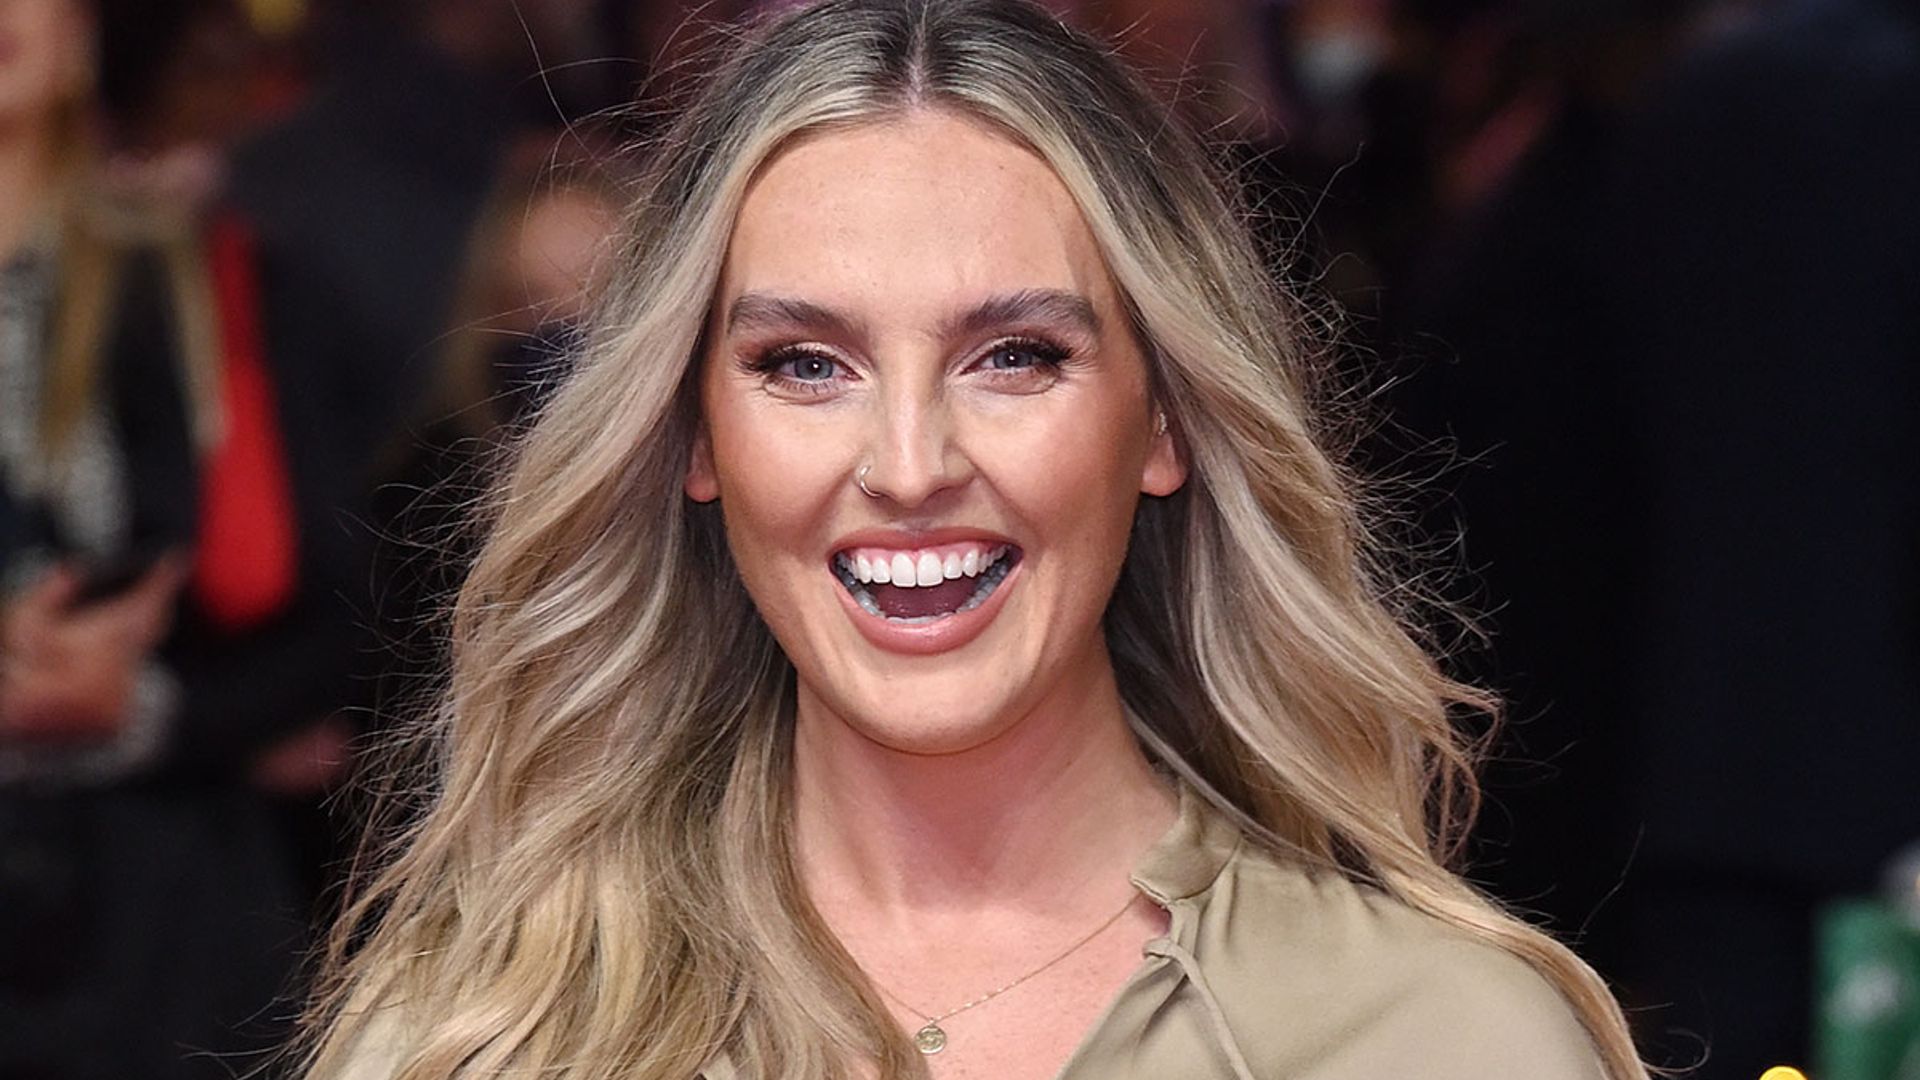 Perrie Edwards shares adorable new video of rarely-seen baby Axel - watch